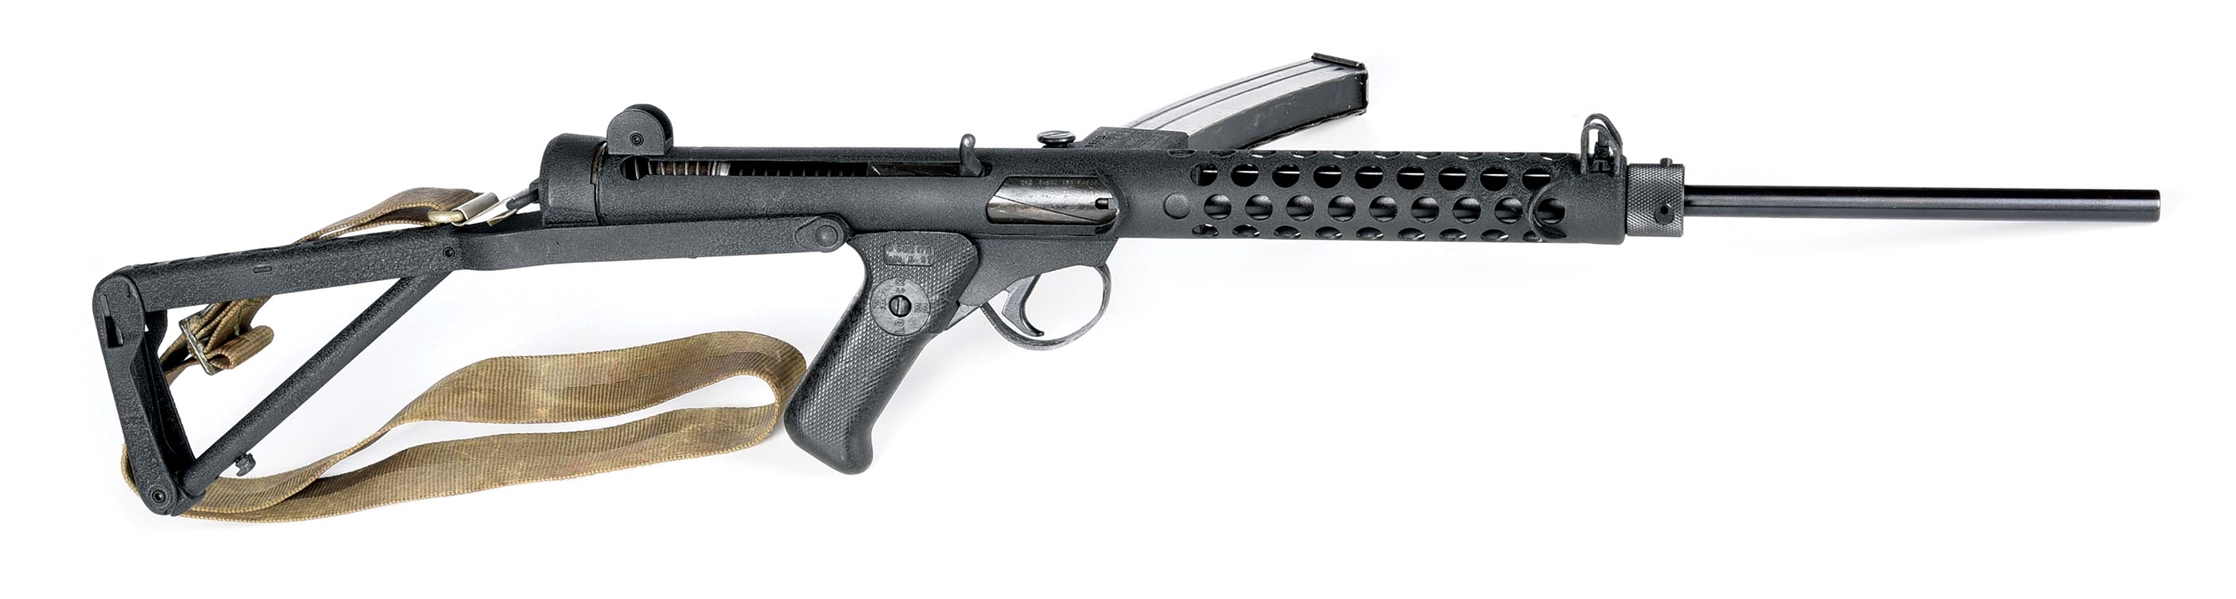 (M) WISE LITE ARMS STERLING SPORTER SEMI-AUTOMATIC CARBINE.